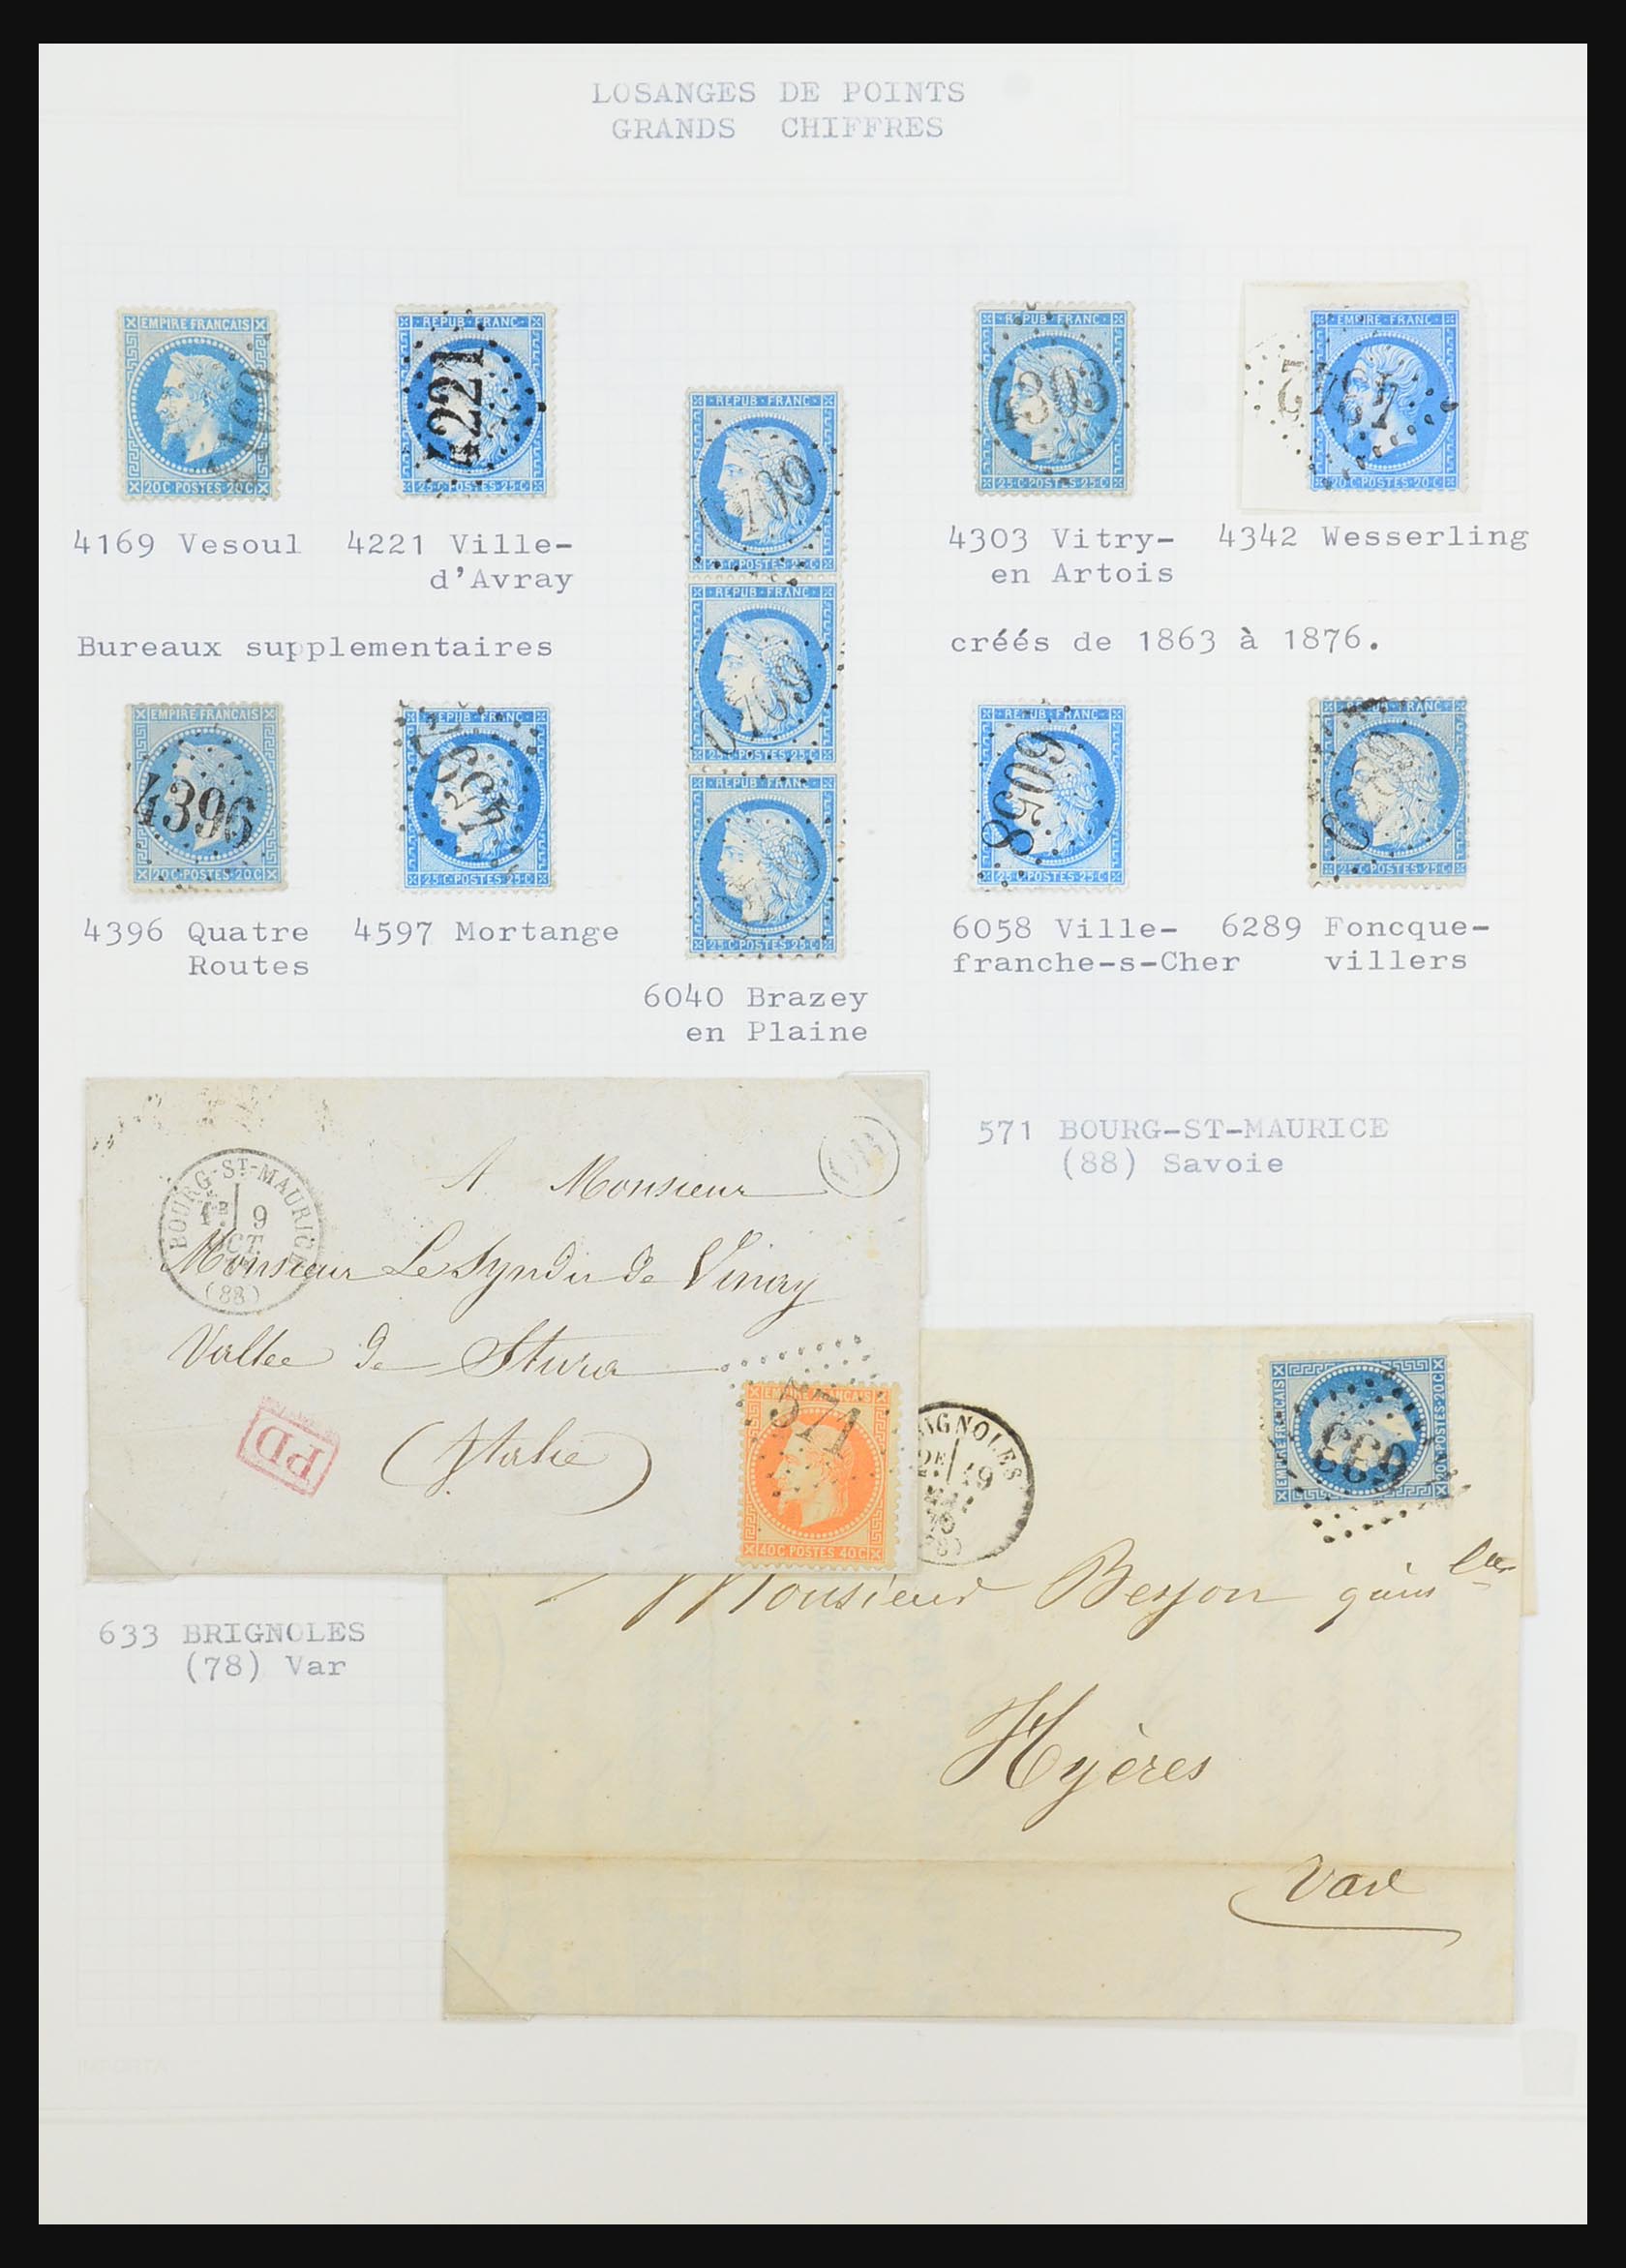 31526 040 - 31526 France covers and cancels 1725 (!)-1900.